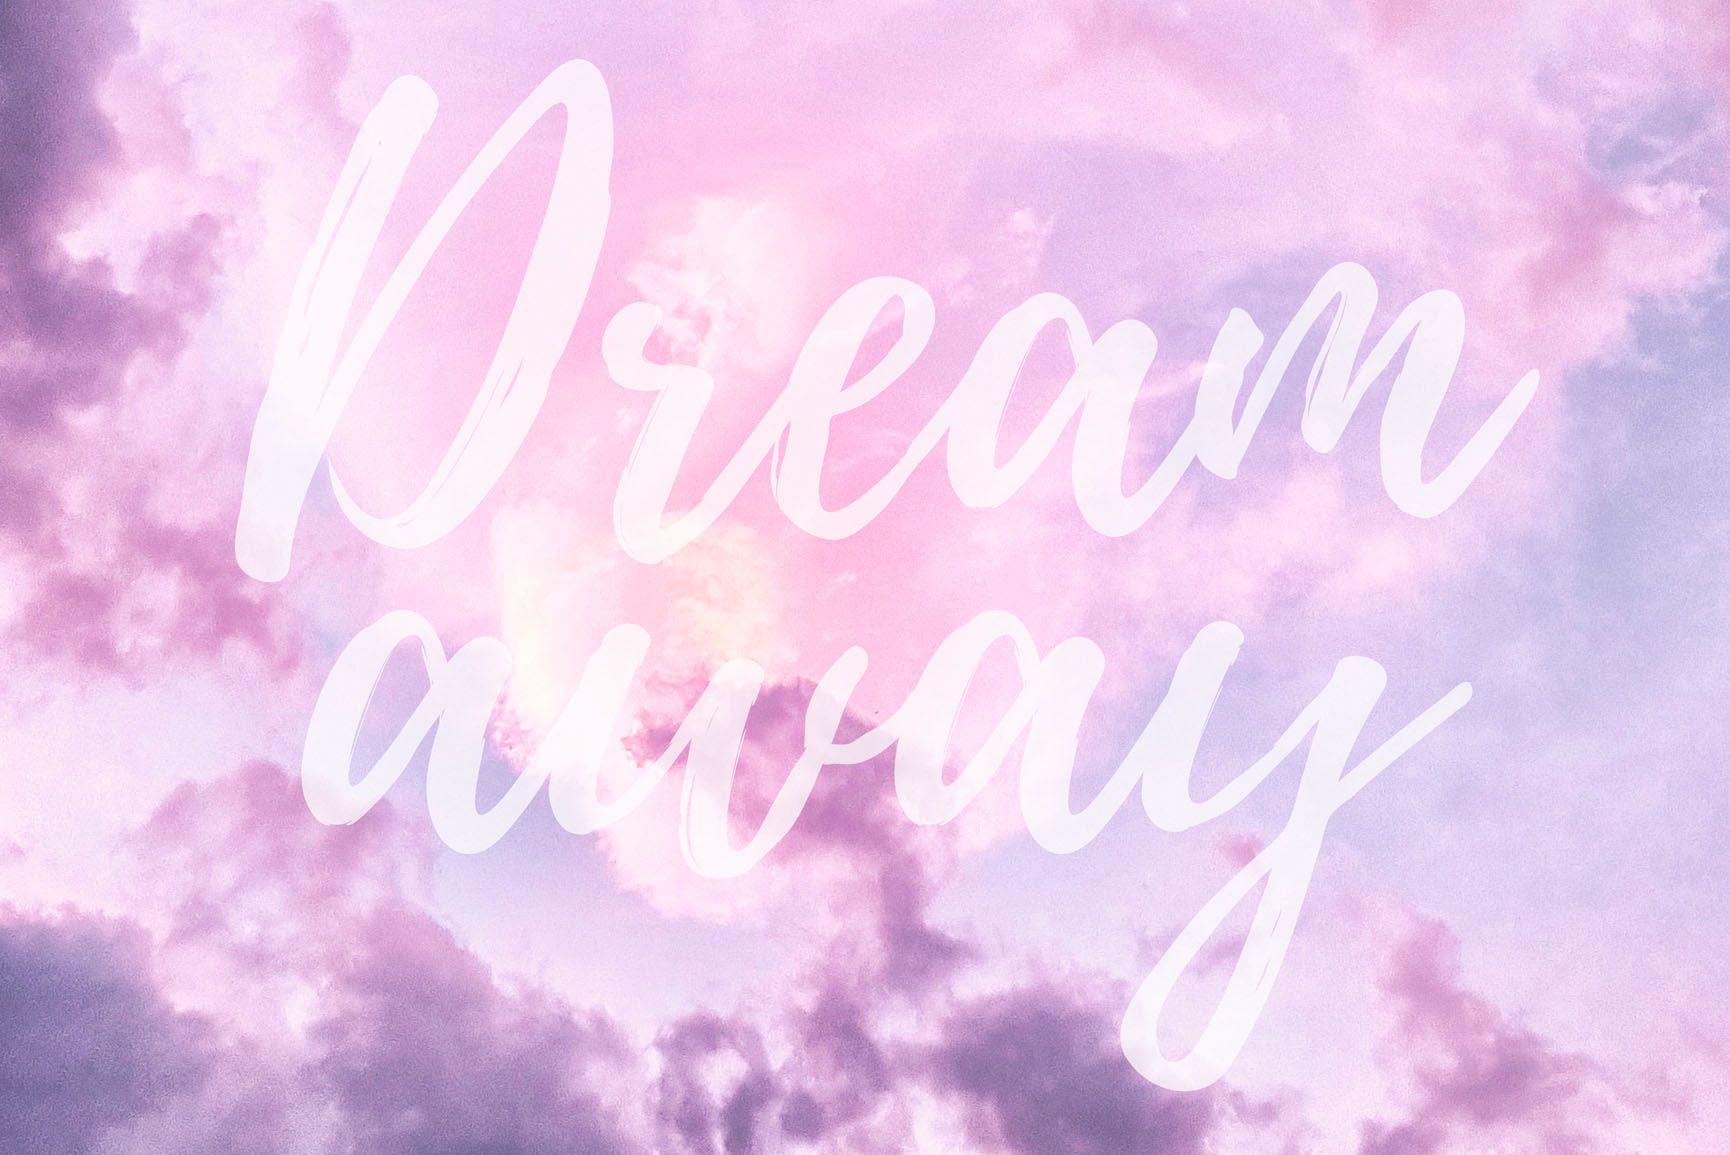 Cloudy Pastel iPhone Wallpaper For Daydreamers